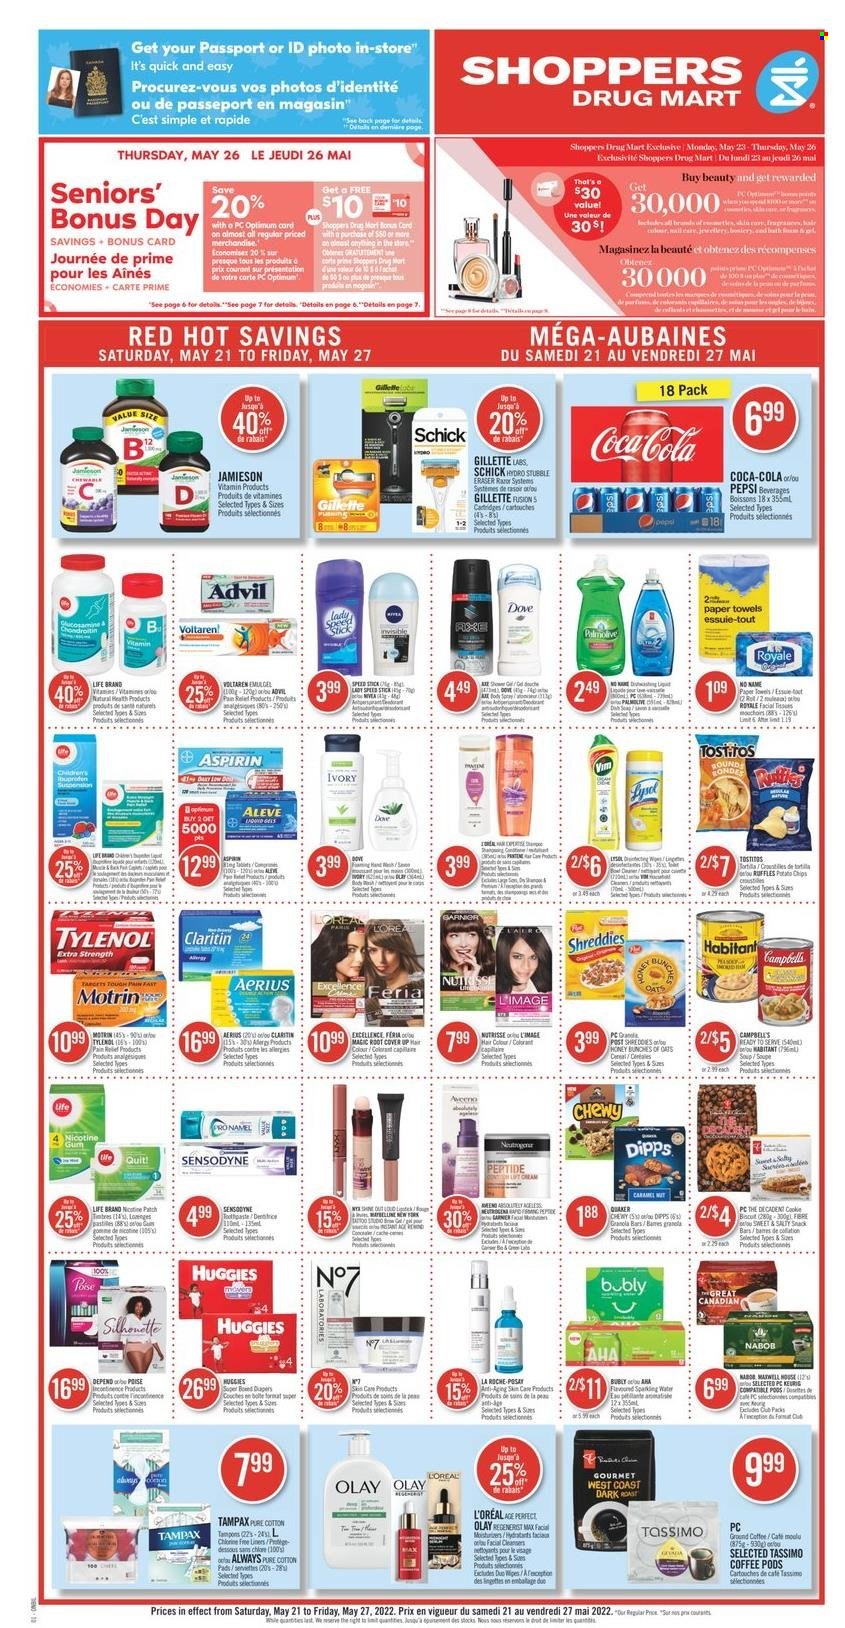 thumbnail - Shoppers Drug Mart Flyer - May 21, 2022 - May 27, 2022 - Sales products - cod, No Name, Campbell's, soup, Quaker, snack, Santa, snack bar, potato chips, chips, Ruffles, granola bar, Coca-Cola, Pepsi, sparkling water, coffee pods, ground coffee, wipes, Aveeno, Nivea, kitchen towels, paper towels, Palmolive, toothpaste, tampons, Gillette, L’Oréal, Olay, hair color, Speed Stick, Axe, razor, Schick, Maybelline, Optimum, pain relief, Aleve, Tylenol, Ibuprofen, Advil Rapid, aspirin, Motrin, Dove, Garnier, Tampax, Huggies, Chloé, Sensodyne. Page 1.